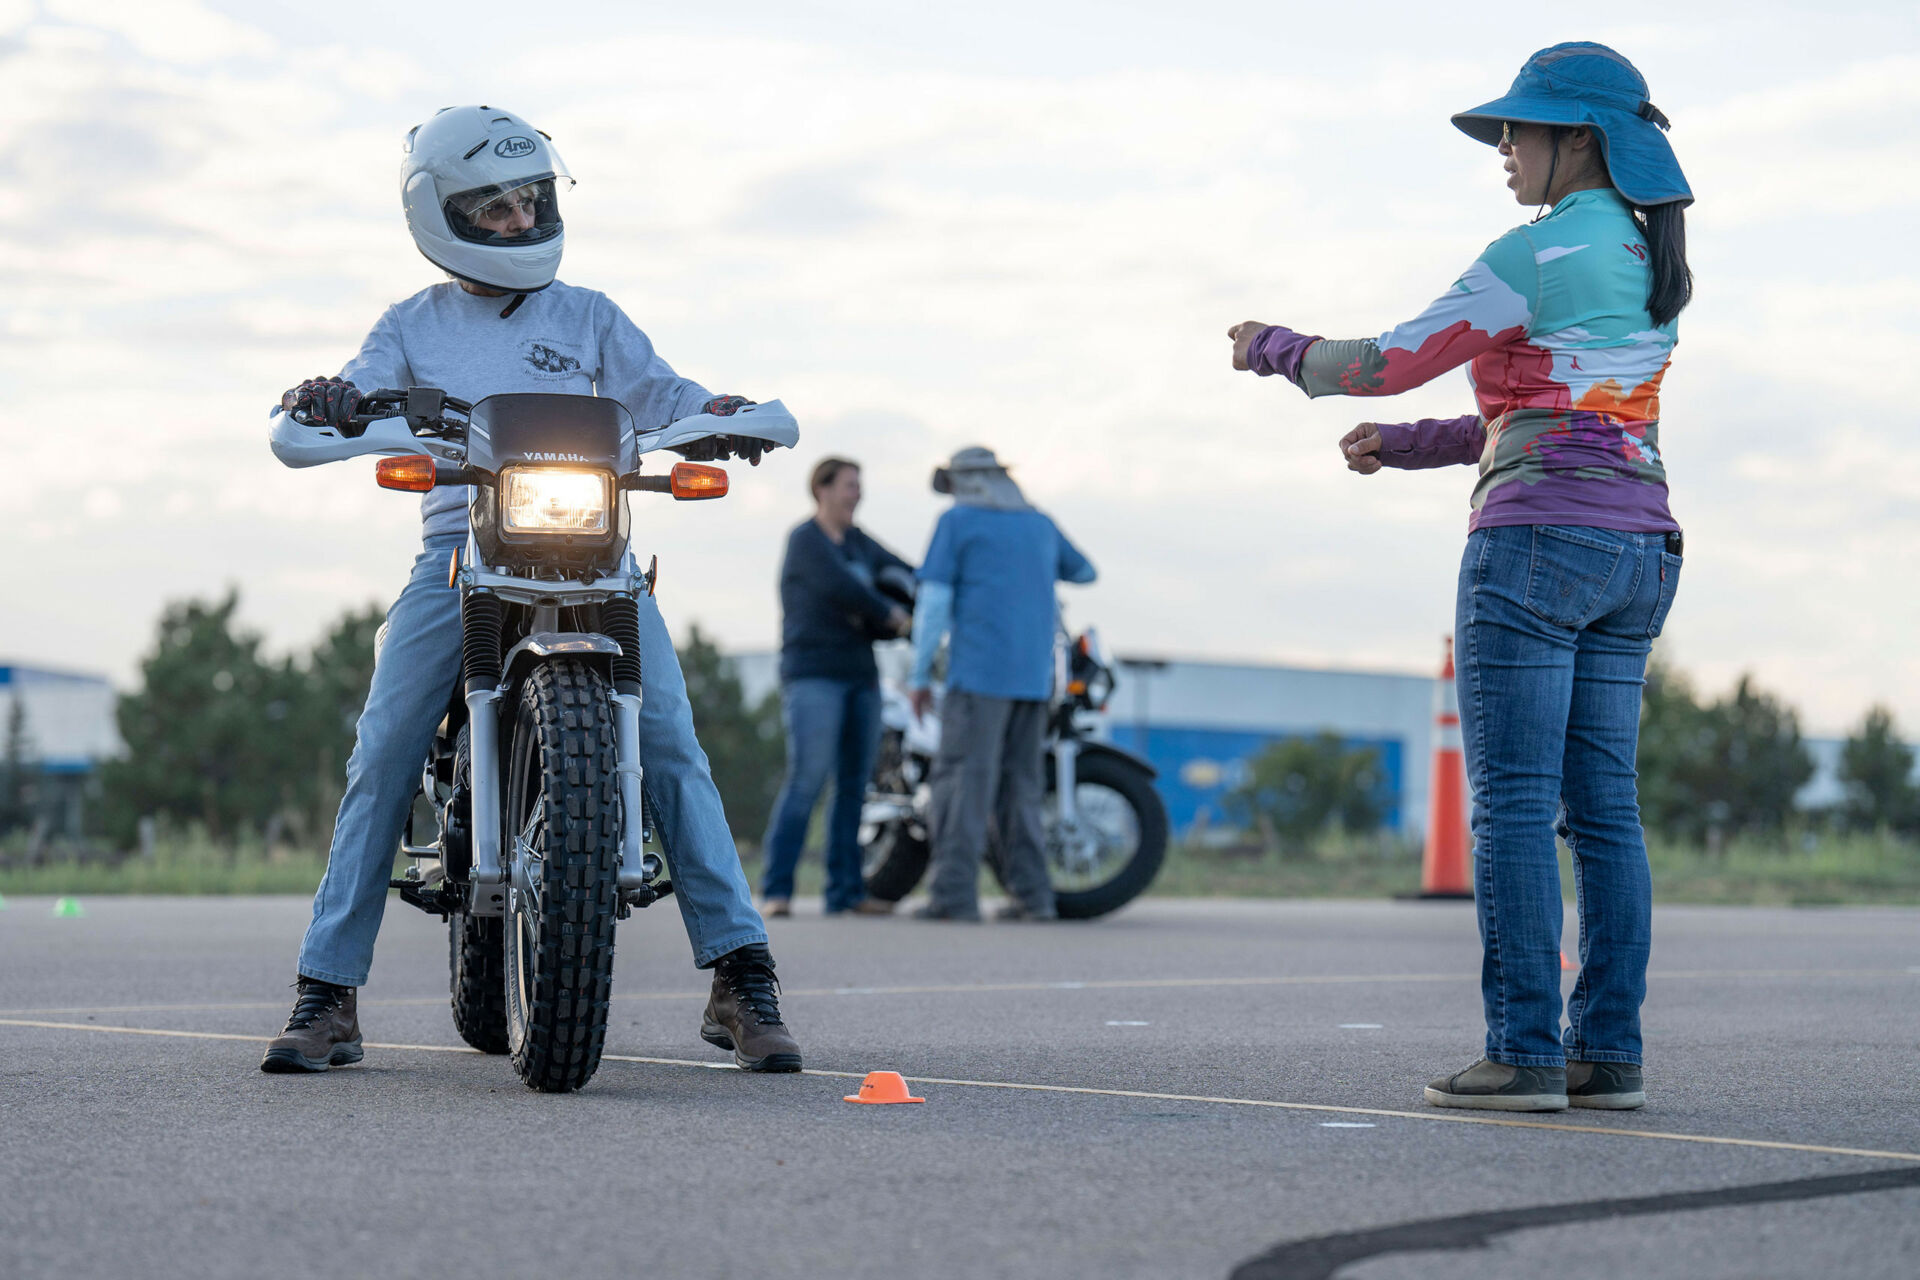 The Motorcycle Safety Foundation (MSF) is holding events all across the U.S. where aspiring motorcyclists can ride a motorcycle for the first time for free. Photo courtesy MSF.